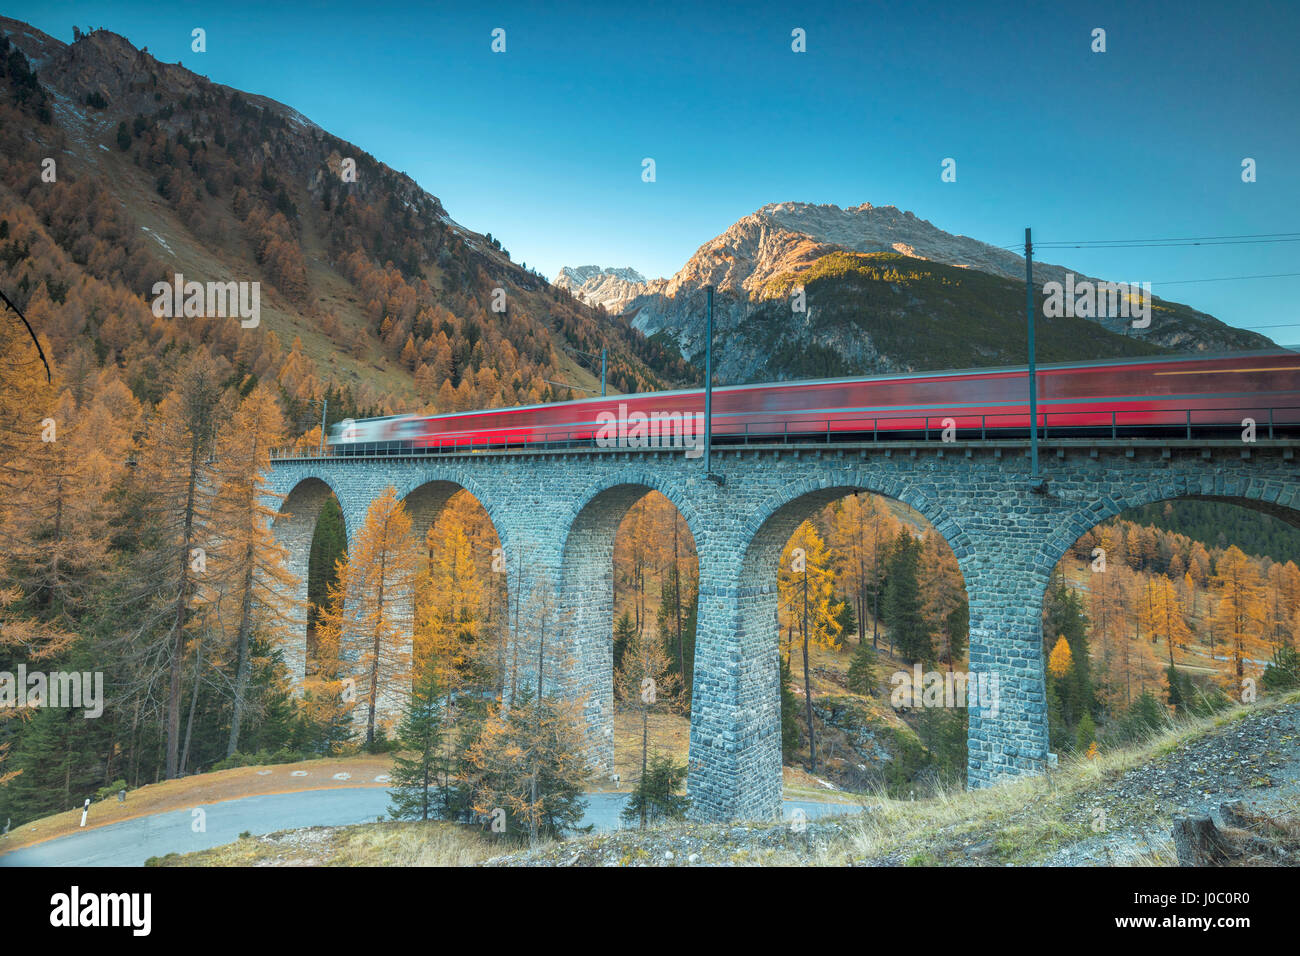 Red train on viaduct surrounded by colorful woods, Preda, Bergun, Albula Valley, Canton of Graubunden, Engadine, Switzerland Stock Photo